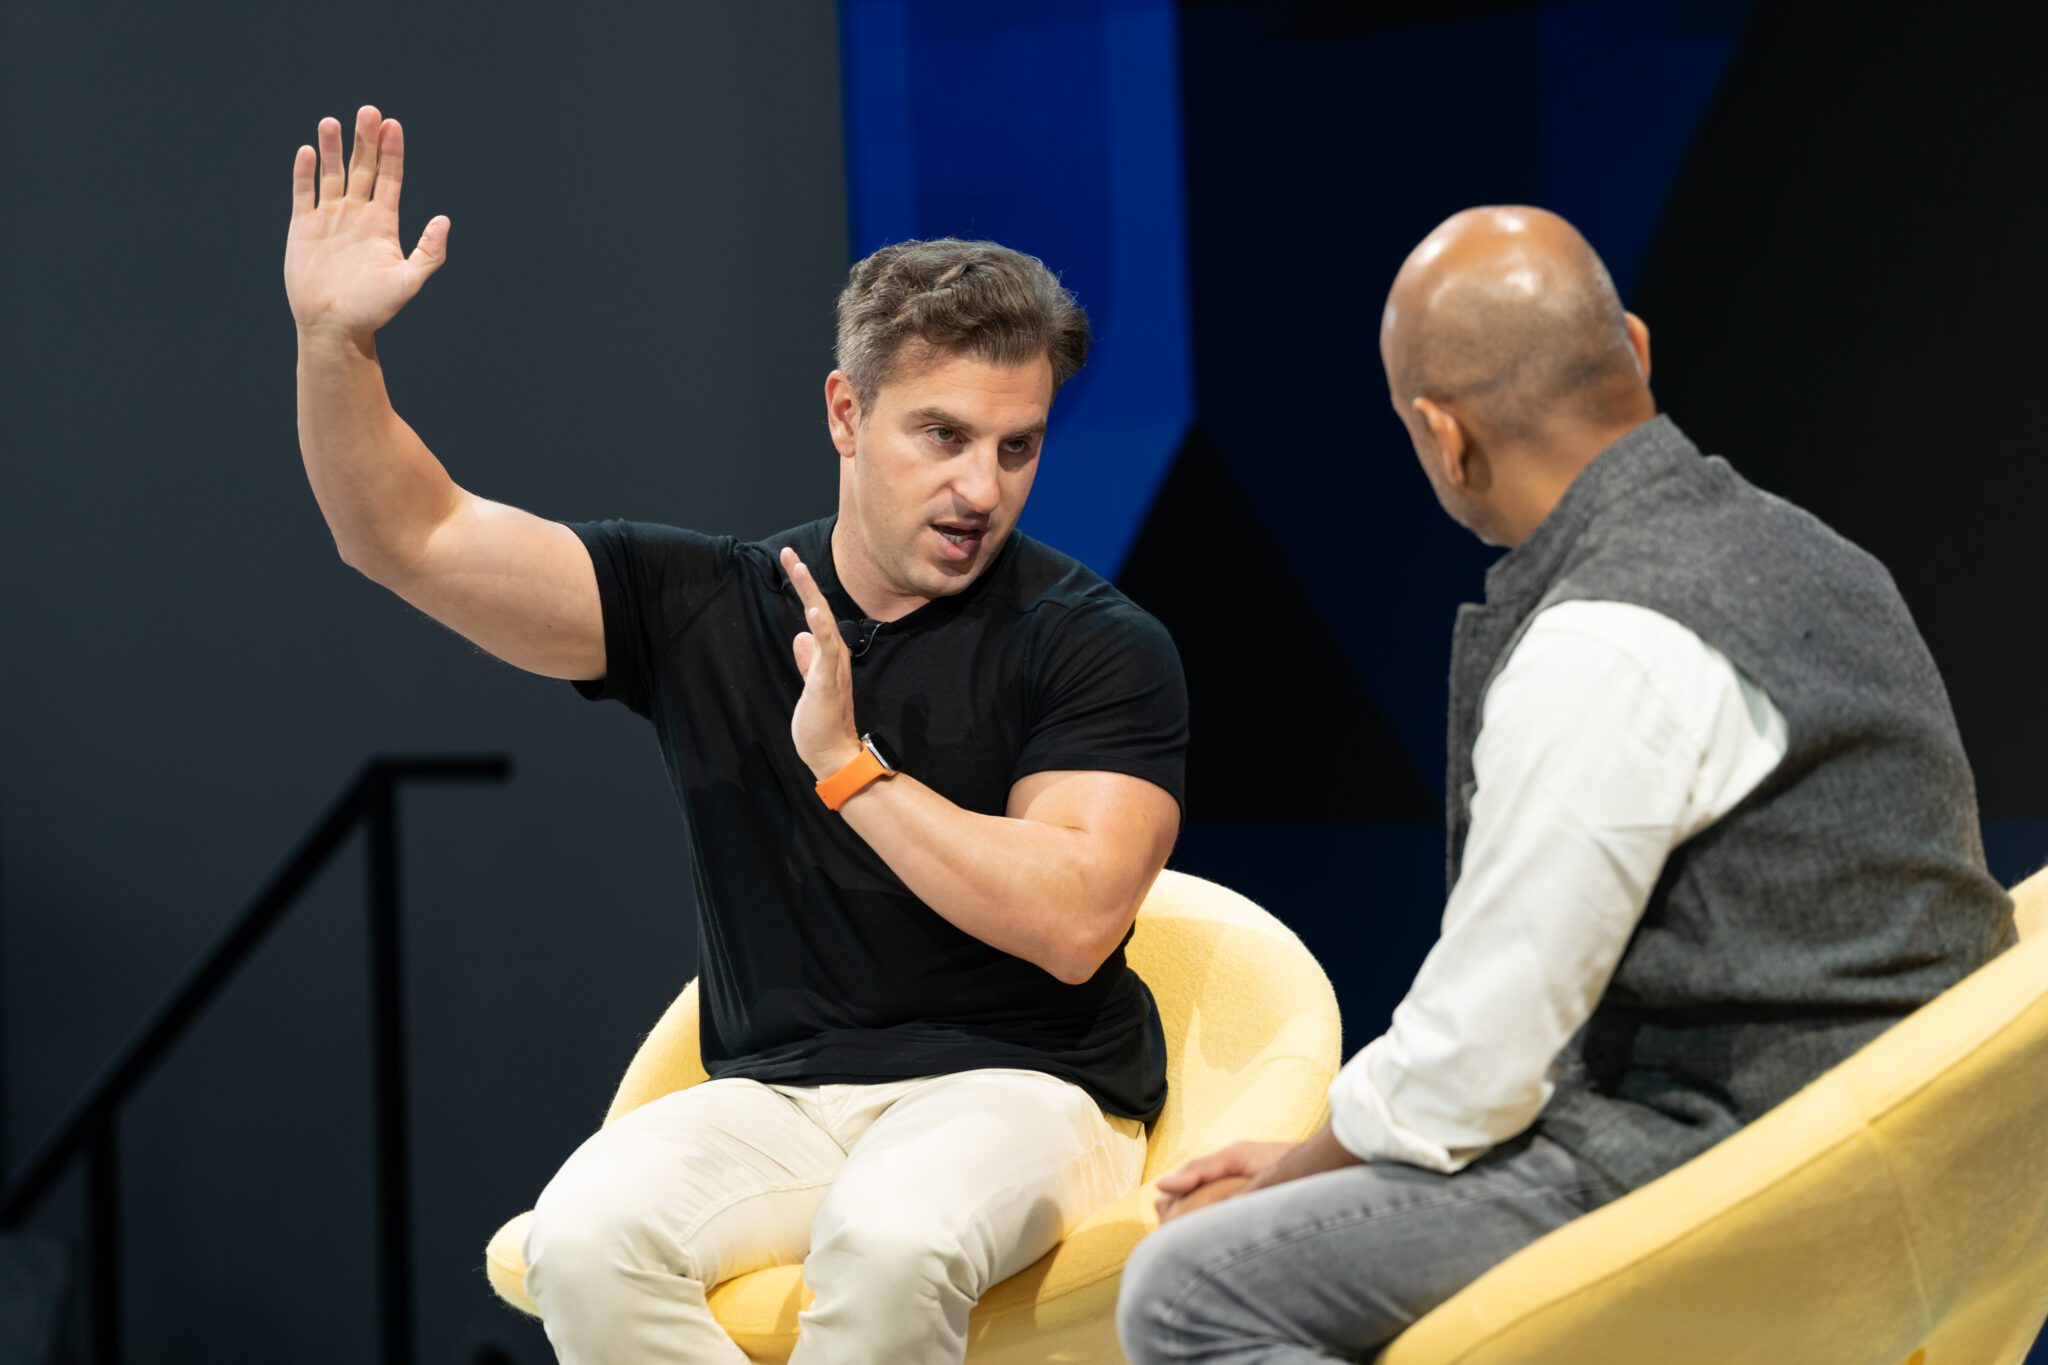 Airbnb CEO Brian Chesky speaking with Skift CEO Rafat Ali At Skift Global Forum in September 2022. Source: Skift